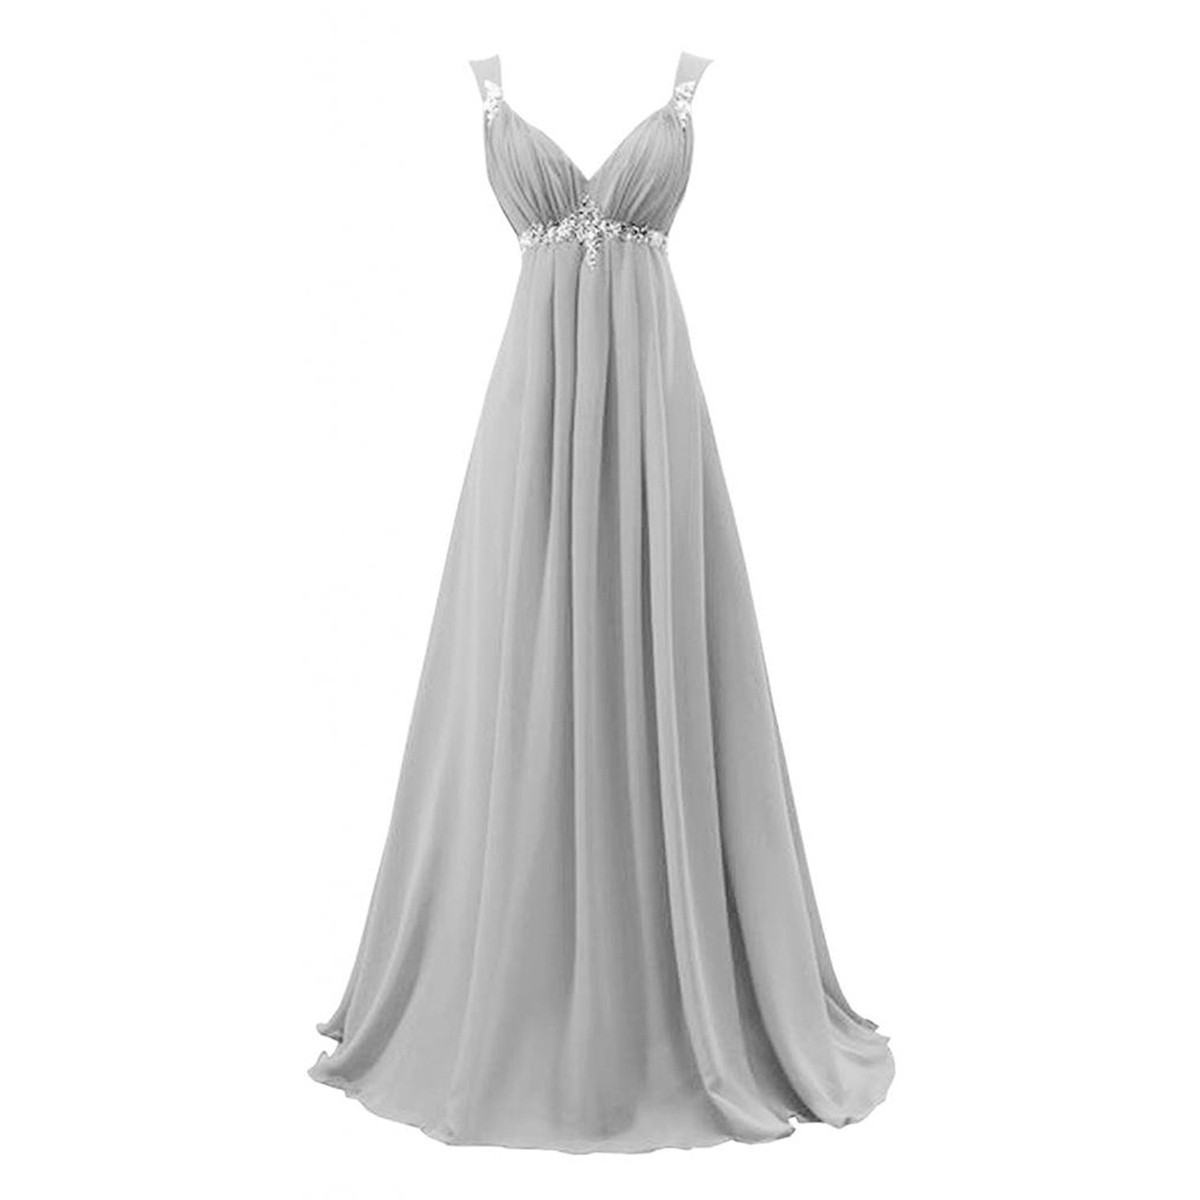 Sexy Gray Bridesmaid Dress,floor Length A Line Gray Bridesmaid Dresses,elegant Long Prom Dresses Party Evening Gown